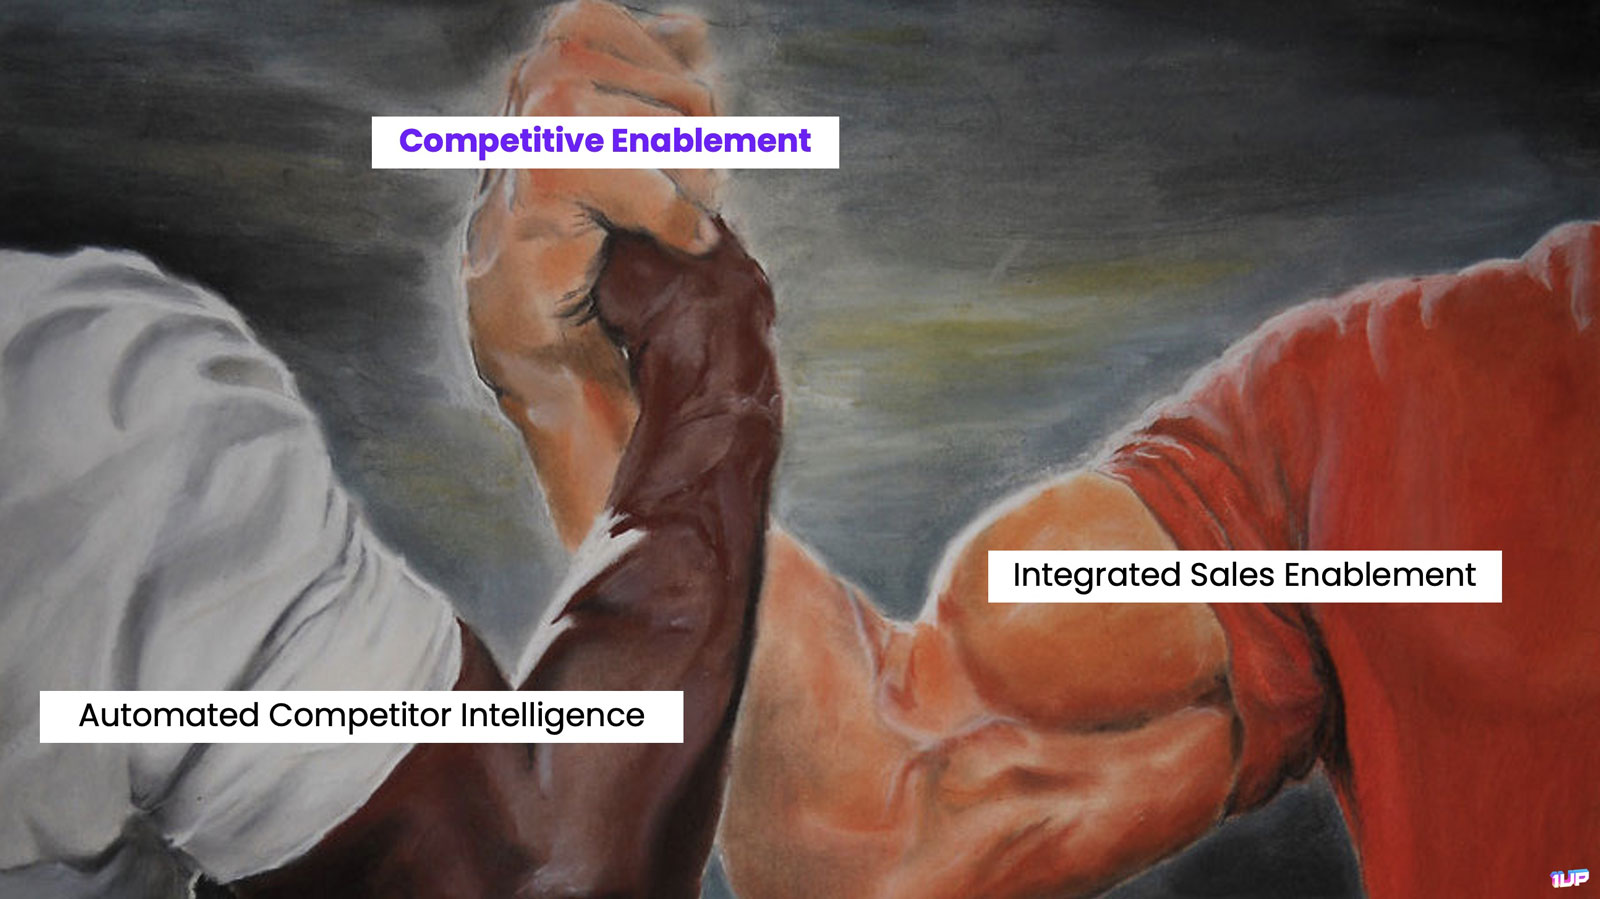 Competitive Enablement